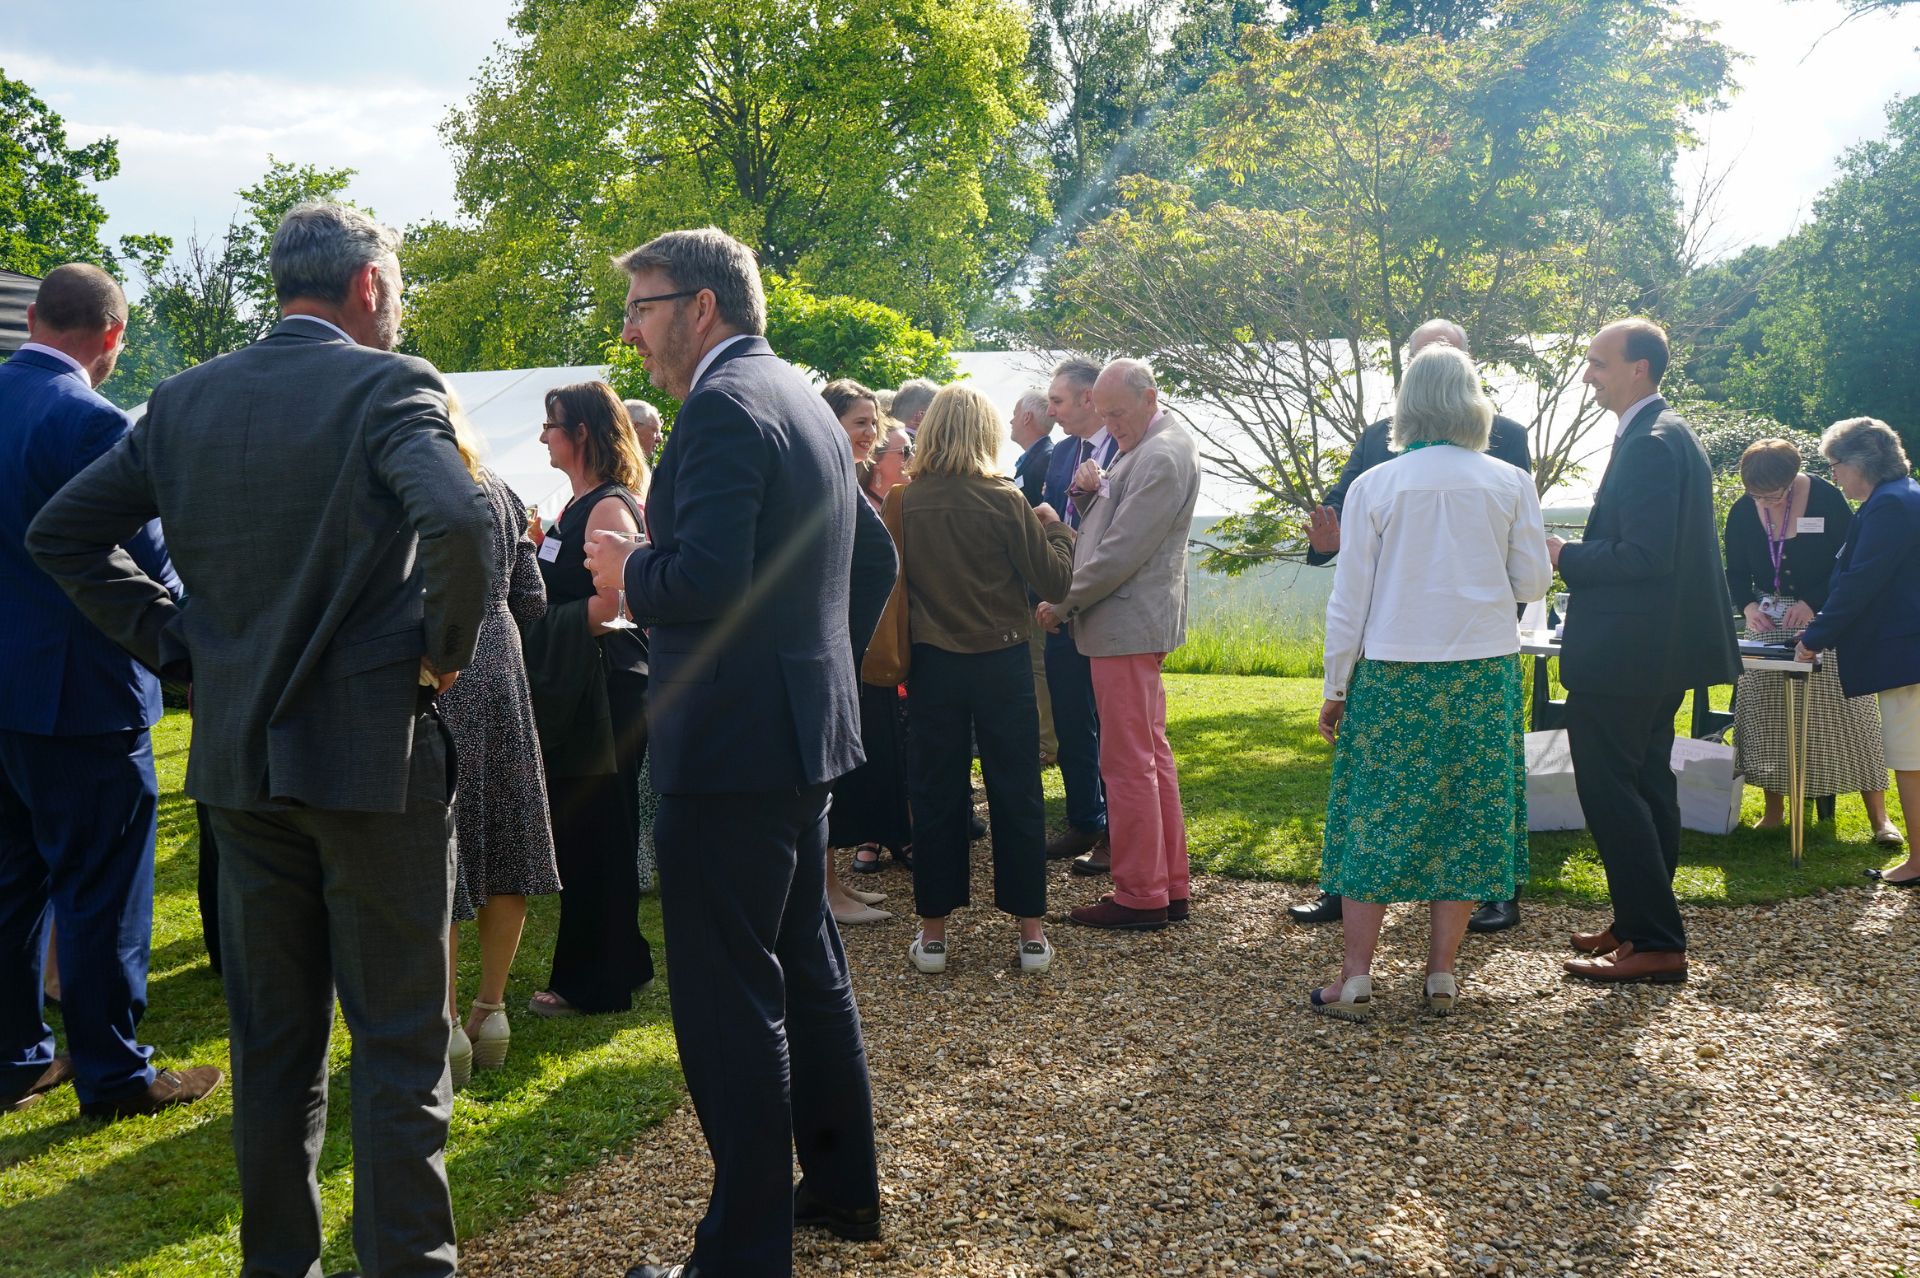 Attendees at the Diocesan Education Team Tent Week event in conversation in the grounds of Willow Grange